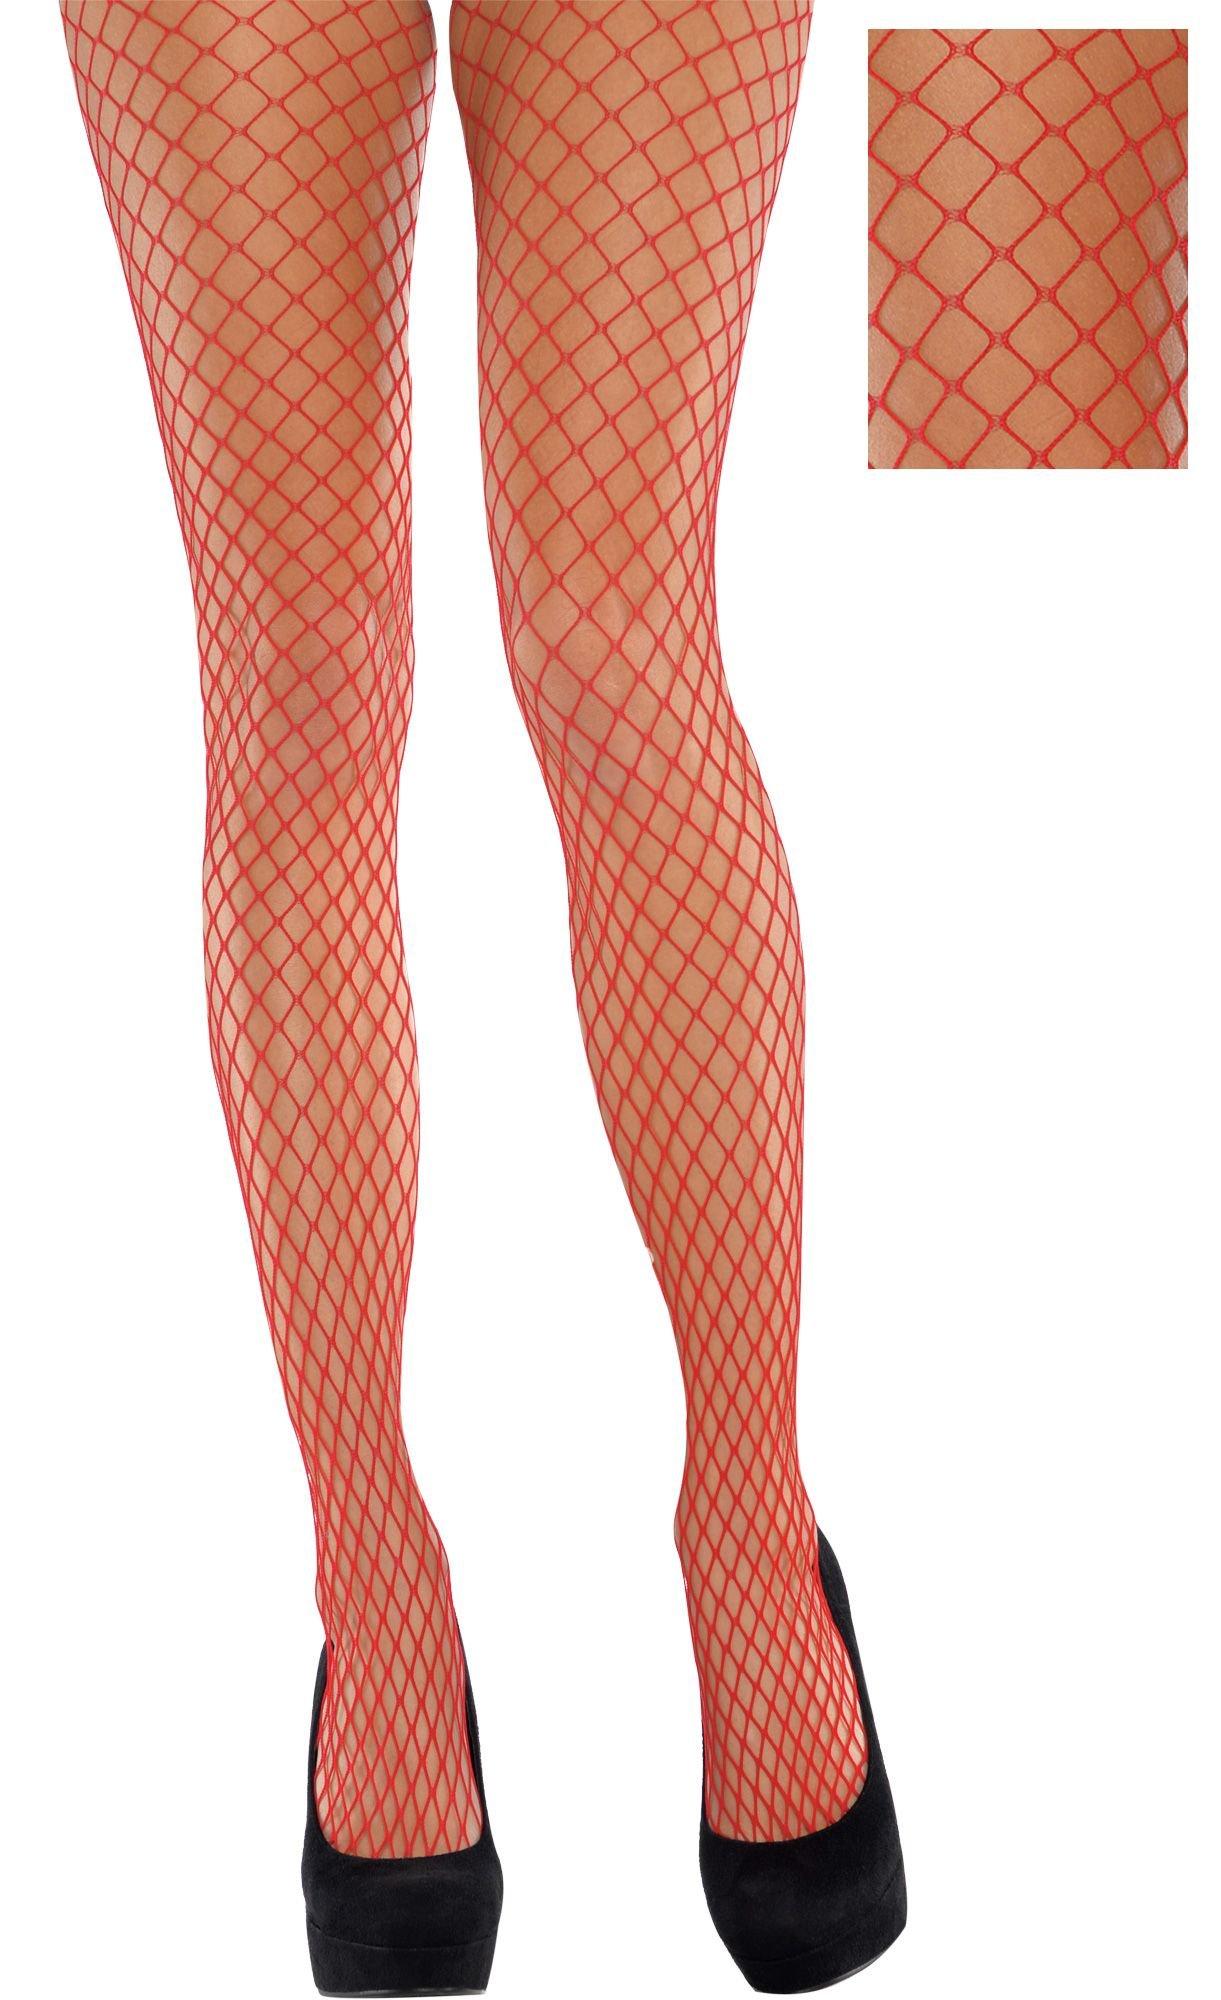 Adult Red Fishnet Pantyhose, $11.99